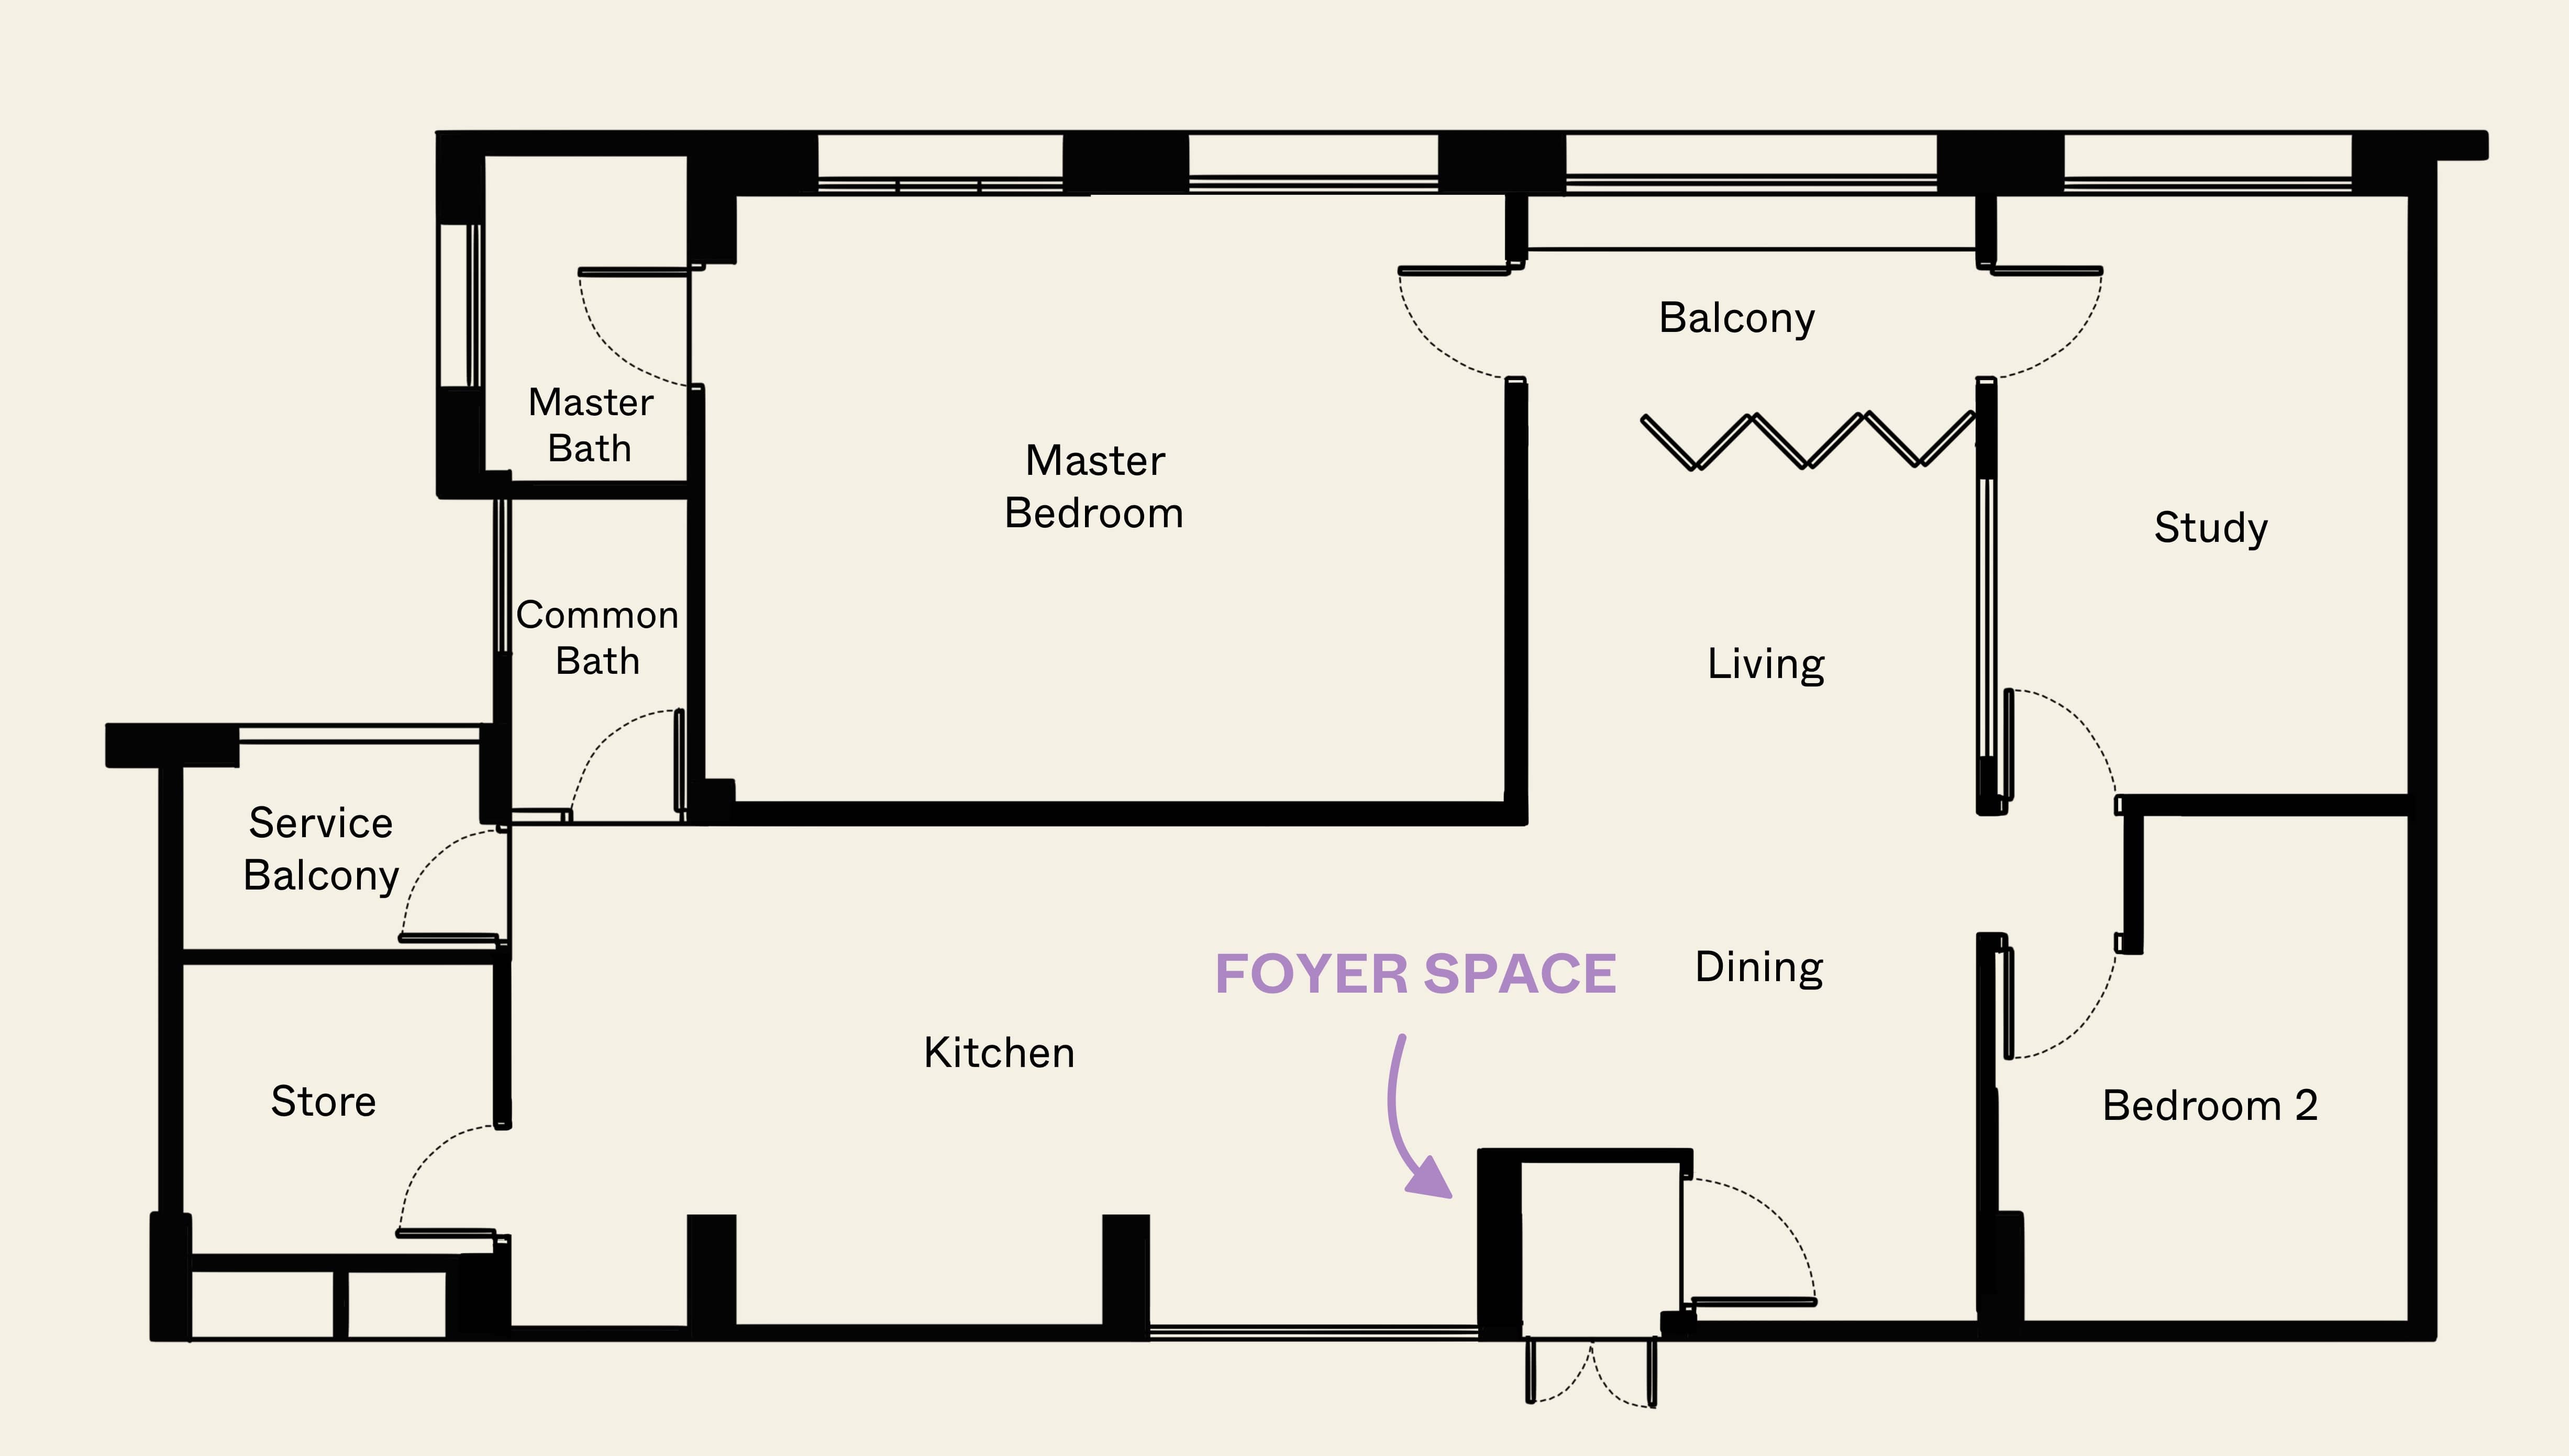 Floor plan example: construction drawings